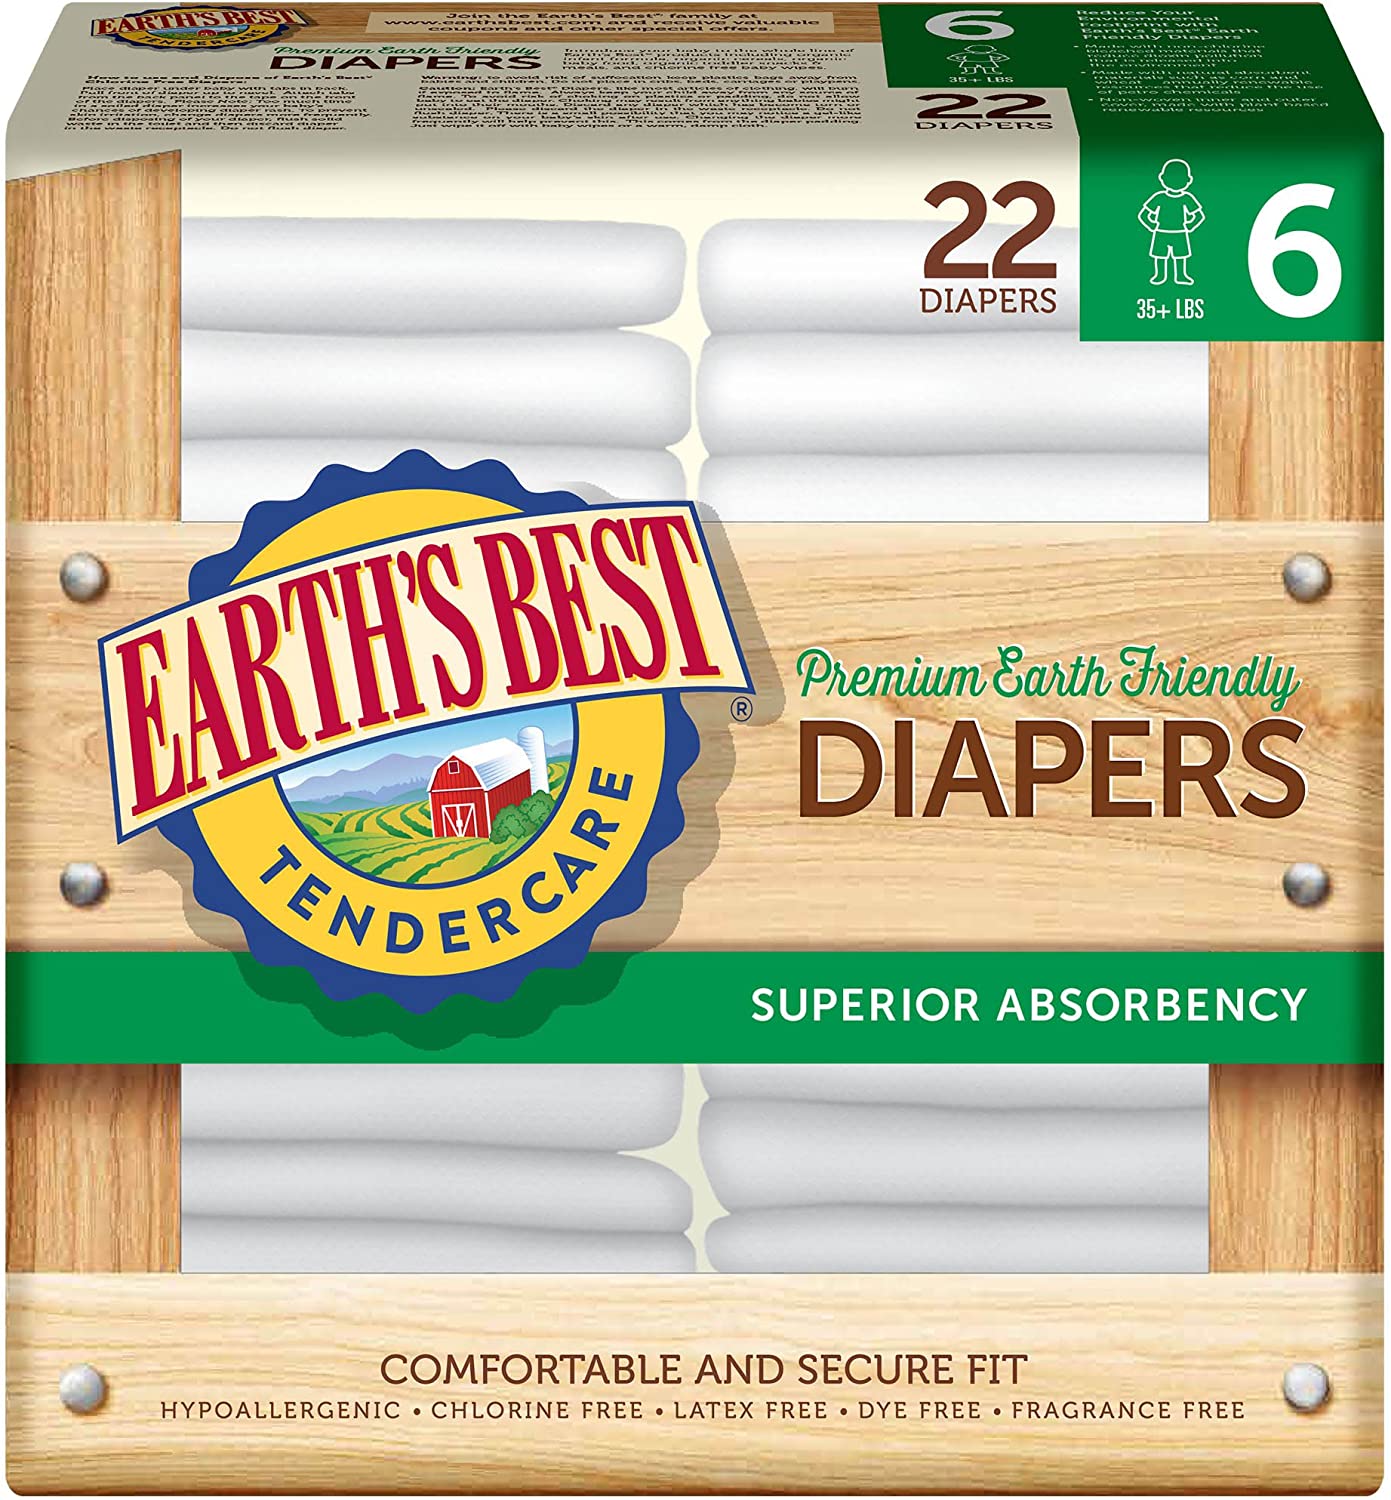 Earth’s Best TenderCare Chlorine-Free Disposable Baby Diapers, (35+ lbs), Size 6 (22 Count)